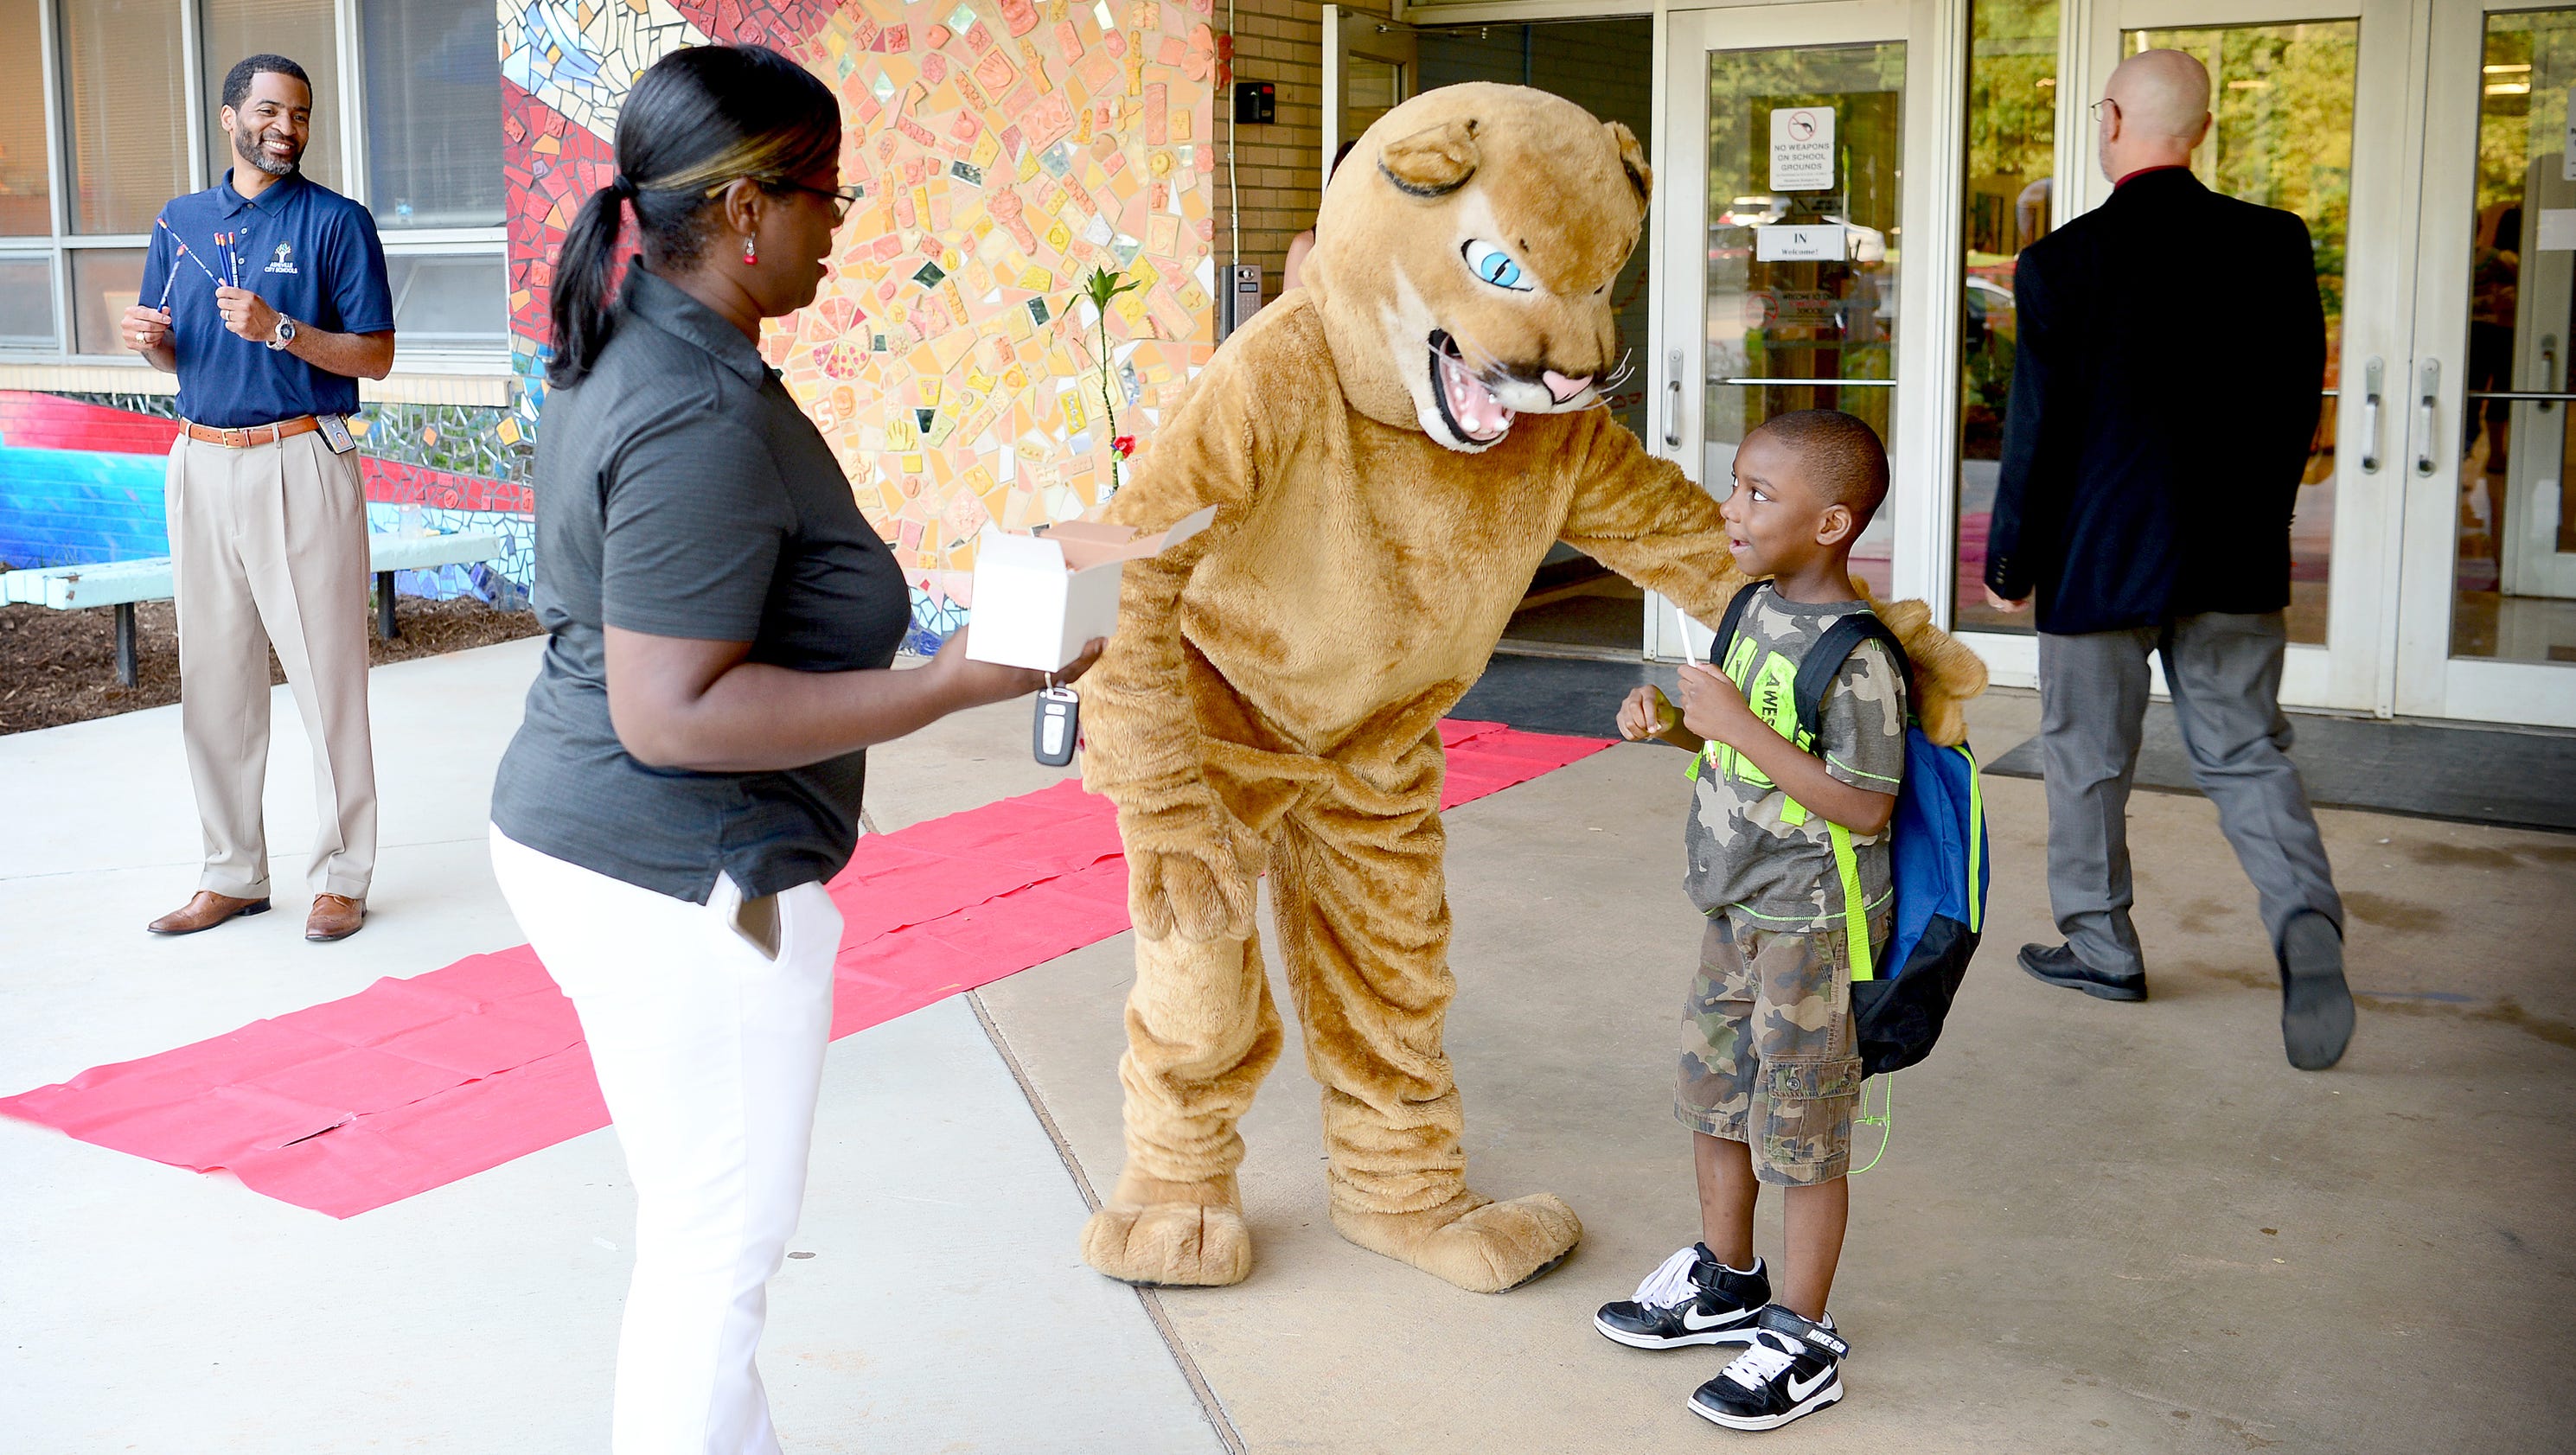 First day arrivals at Hall Fletcher Elementary